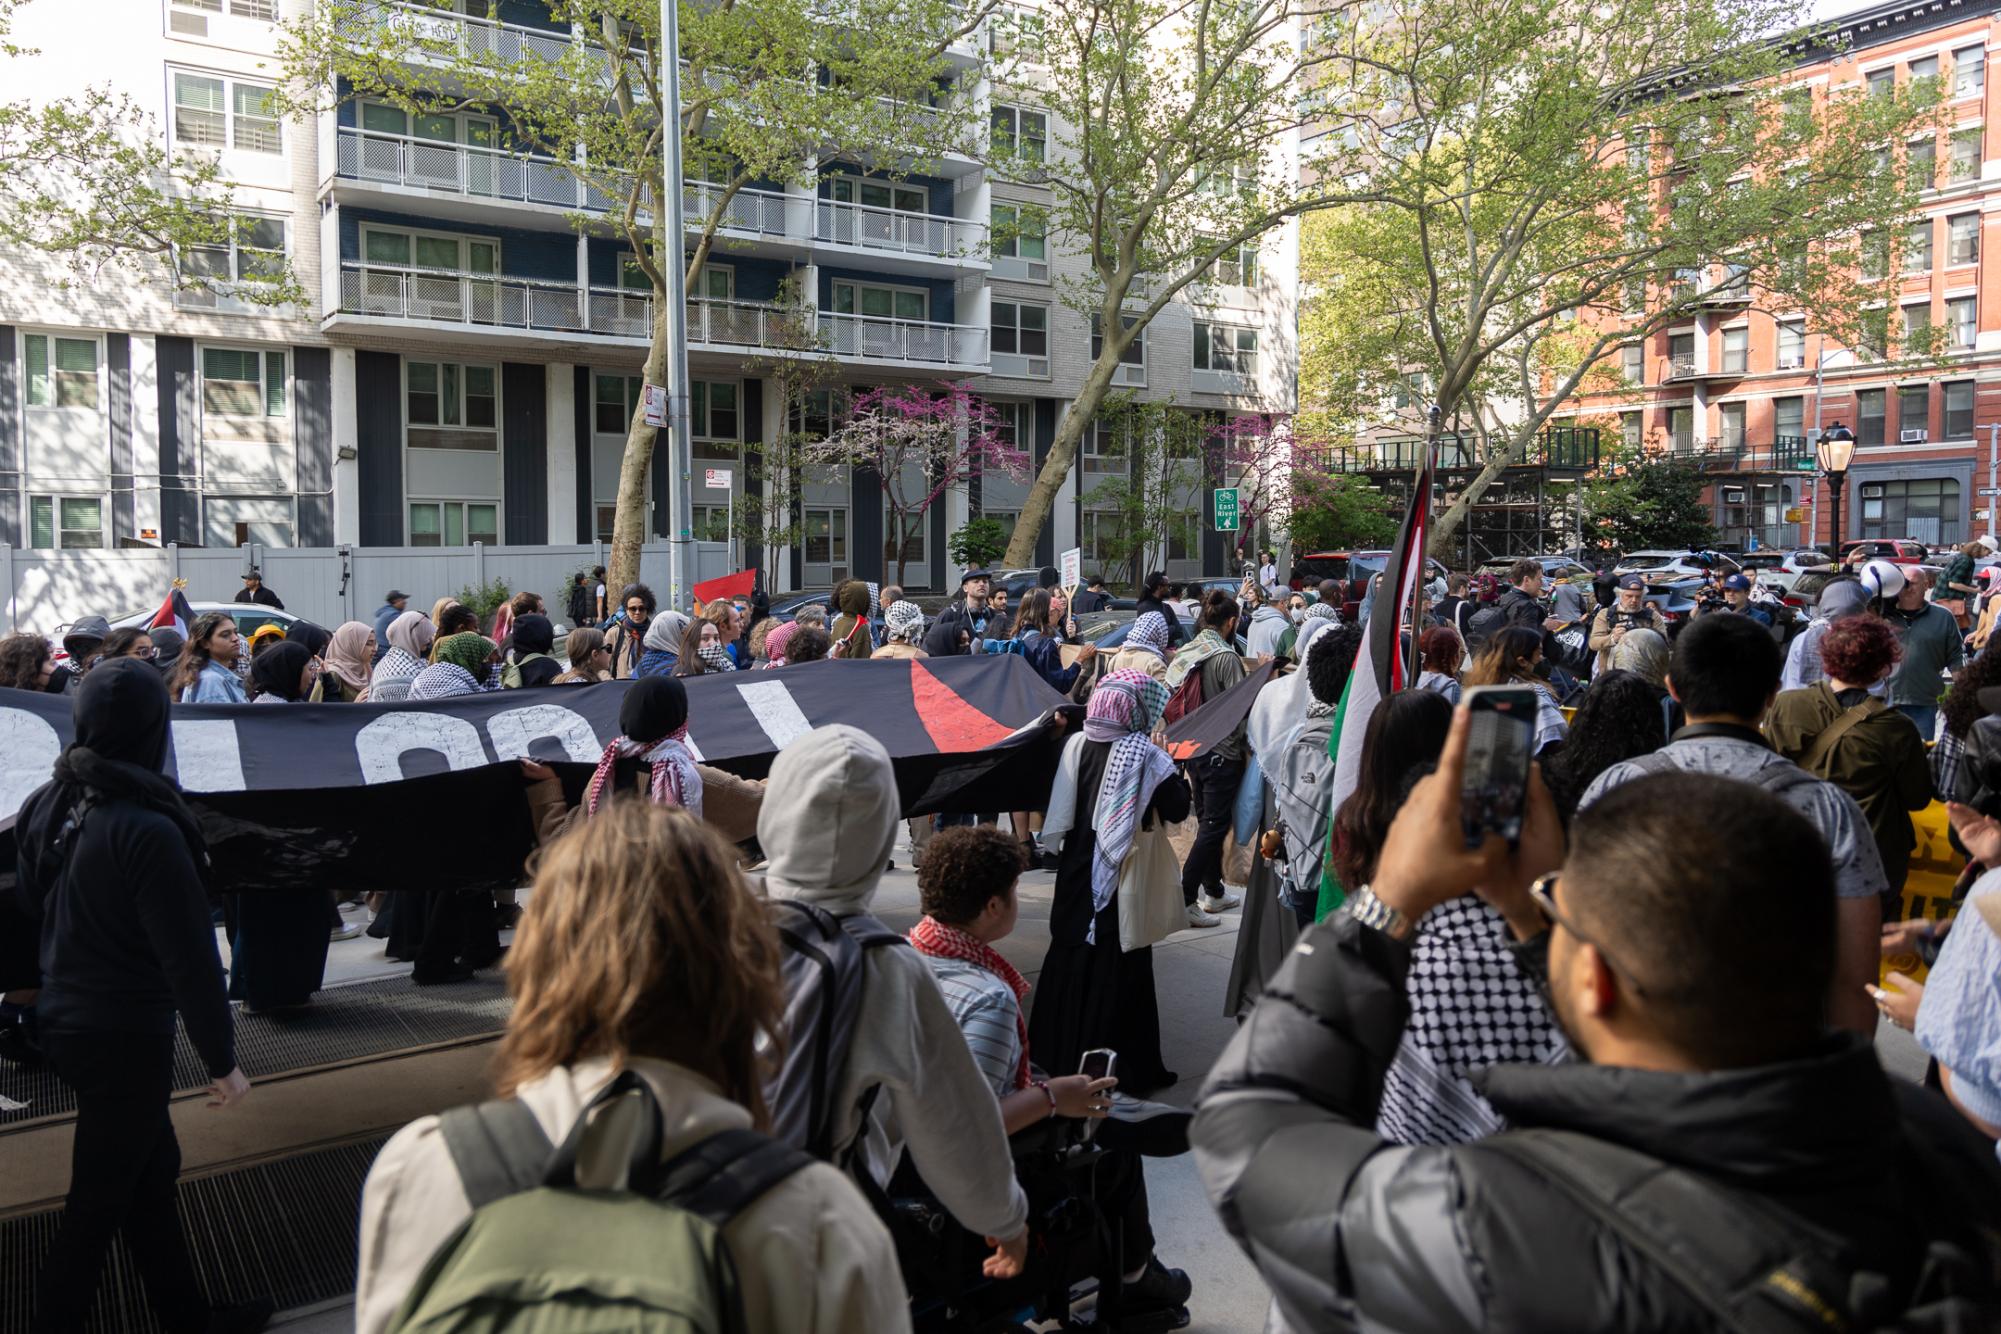 Protesters+gather+at+Paulson+in+citywide+march+through+university+encampments